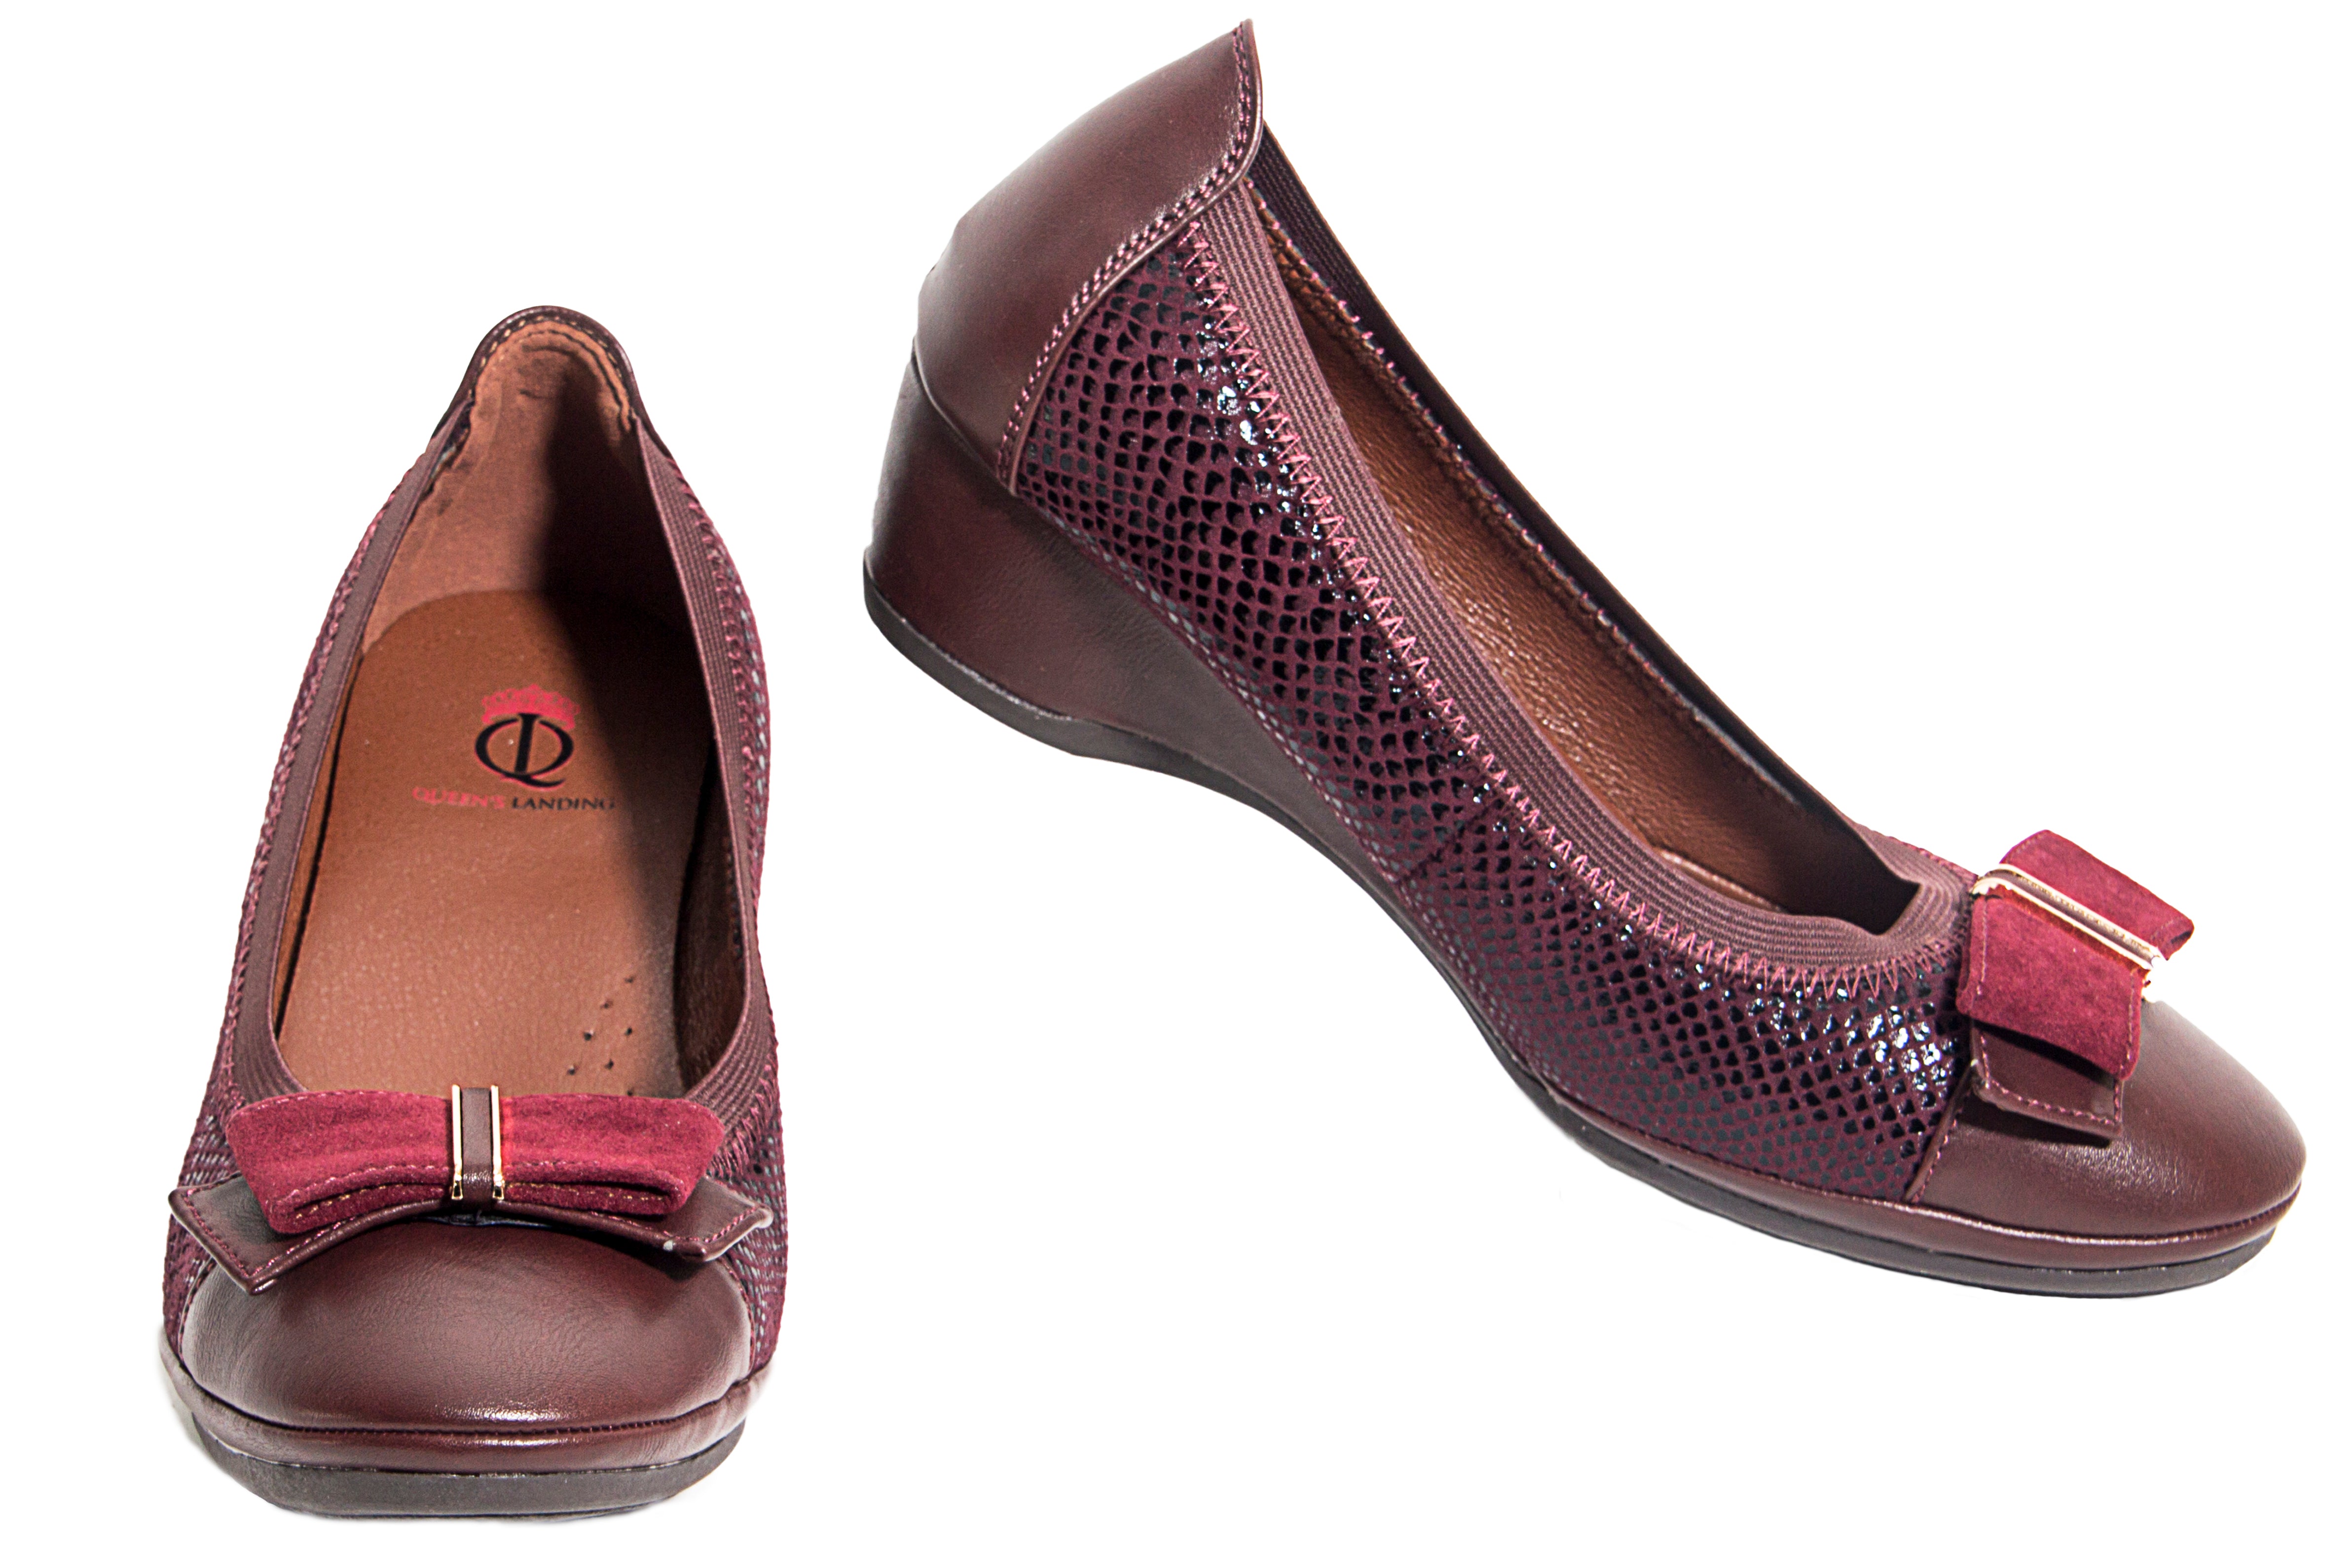 Beautiful Burgundy color comfortable wedge shoes with bow tie front